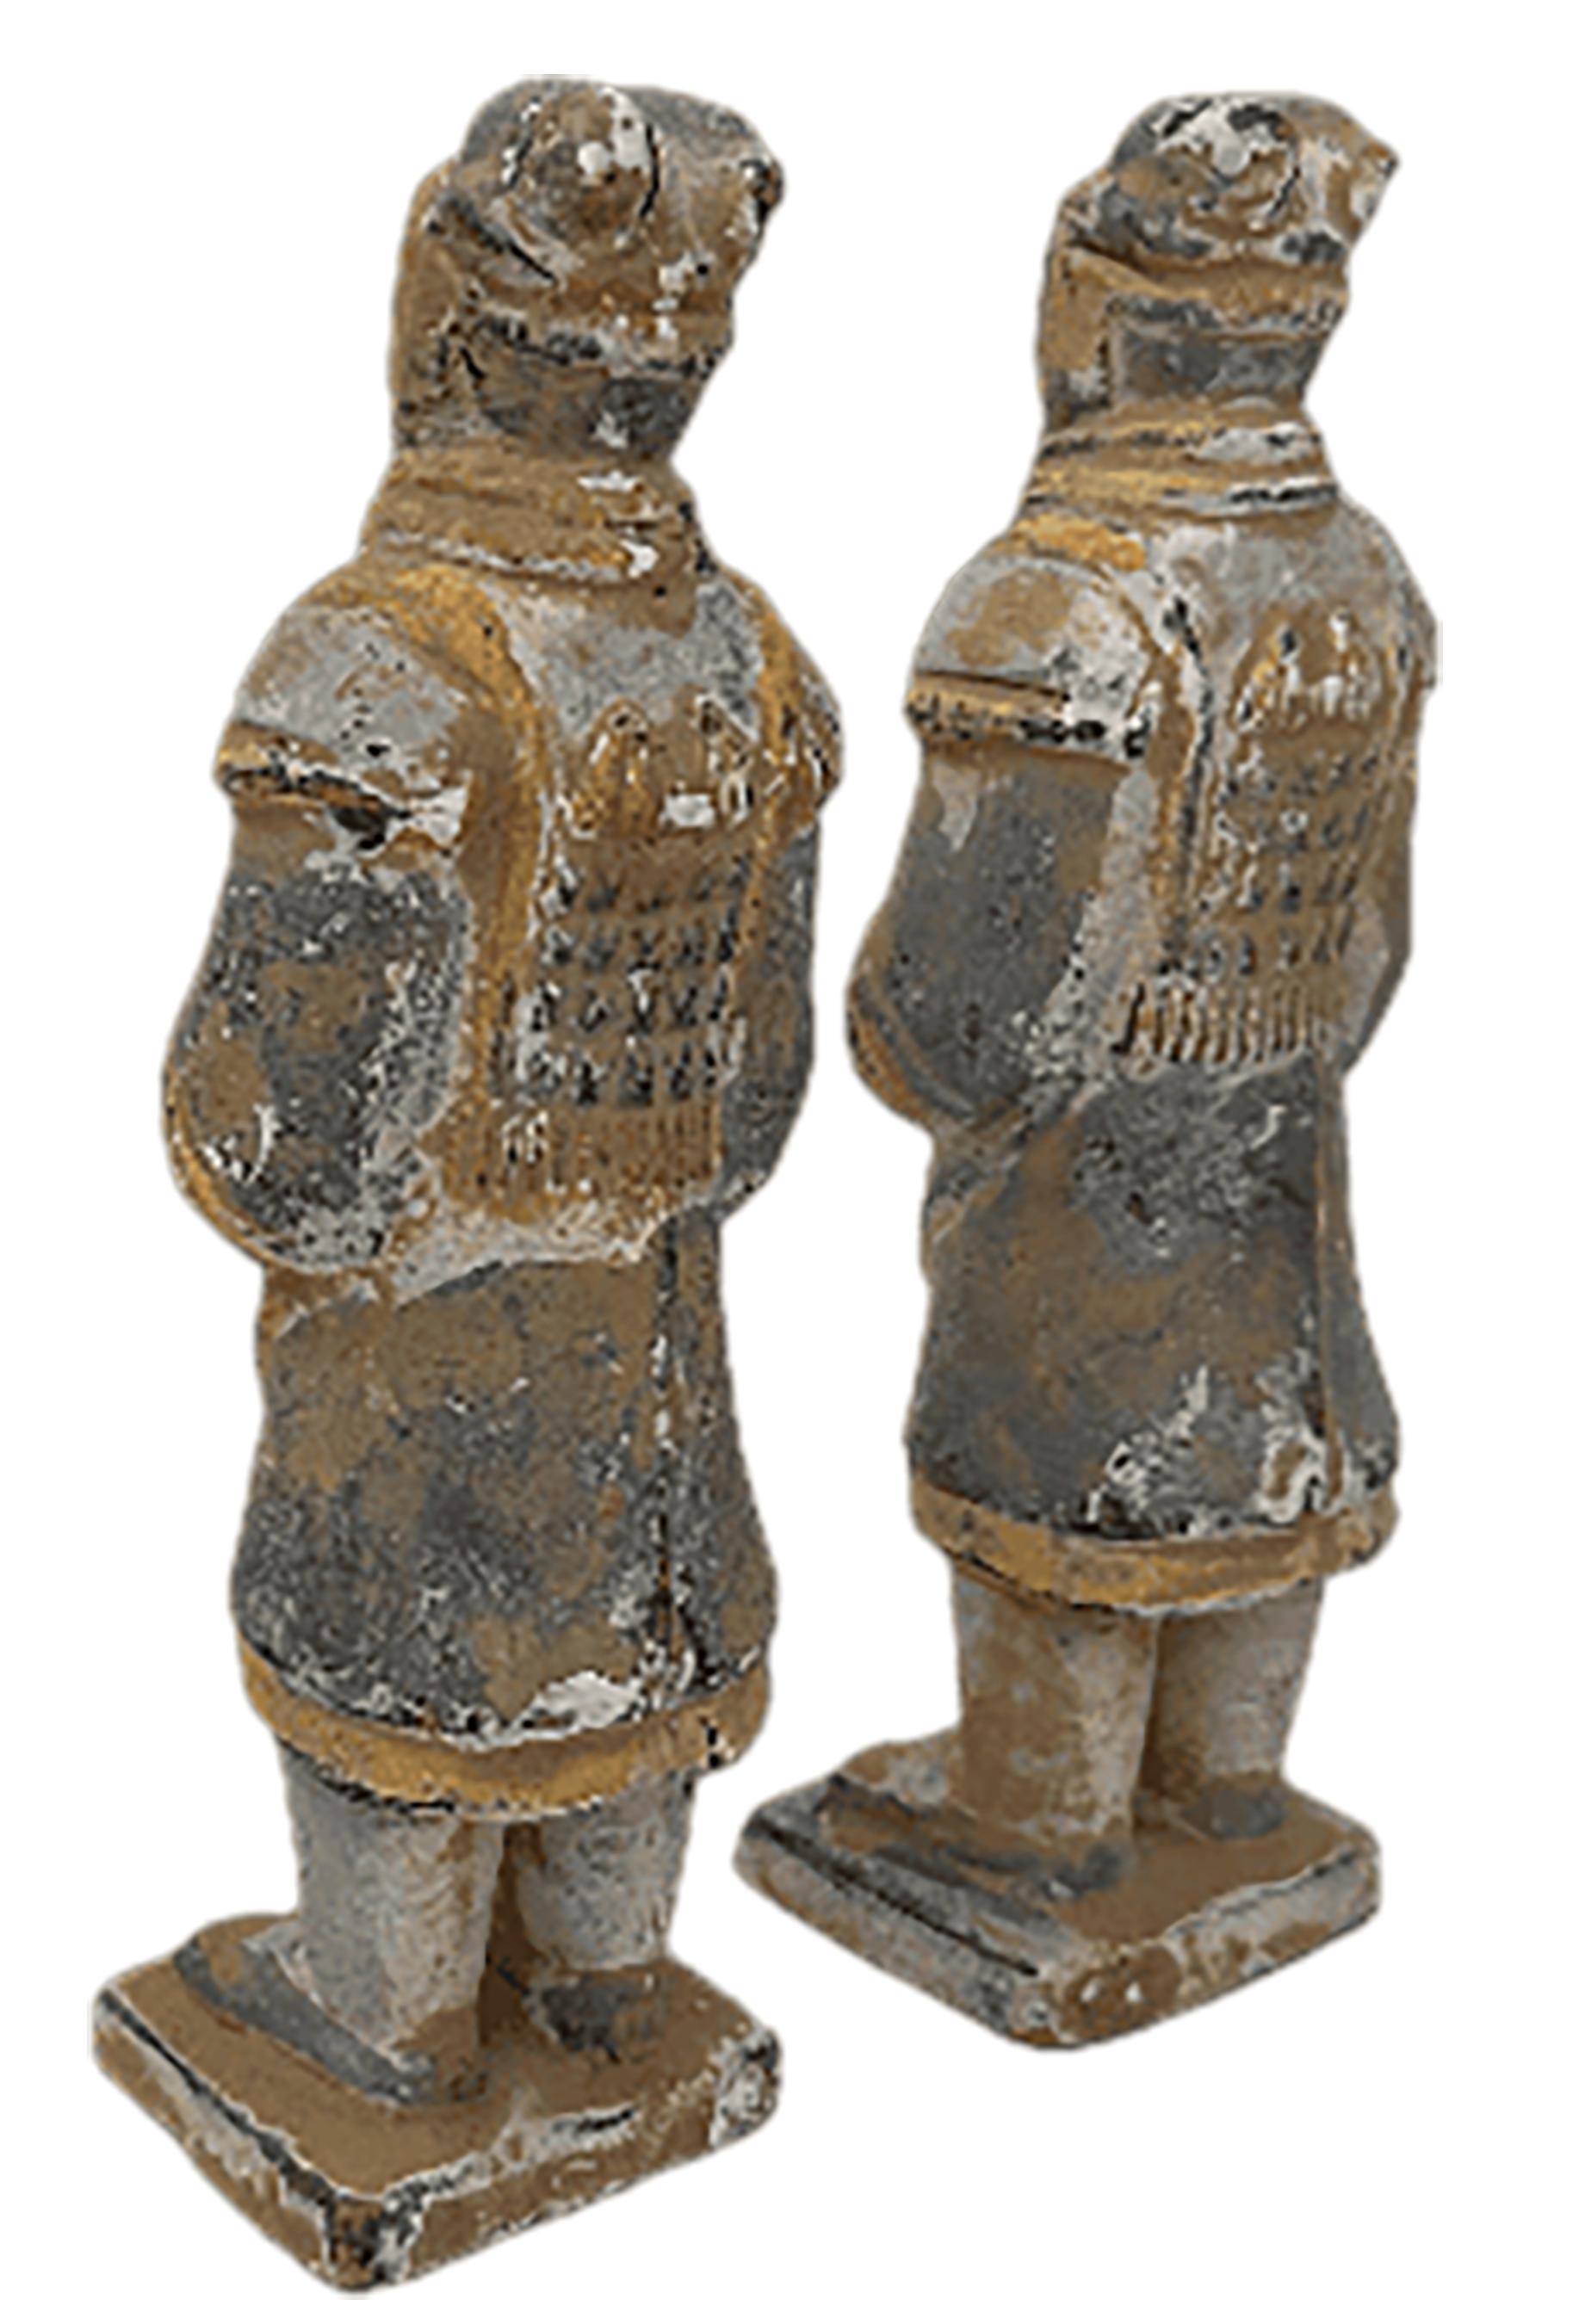 Terracotta A pair of miniature Chinese terracotta burial soldier figurines